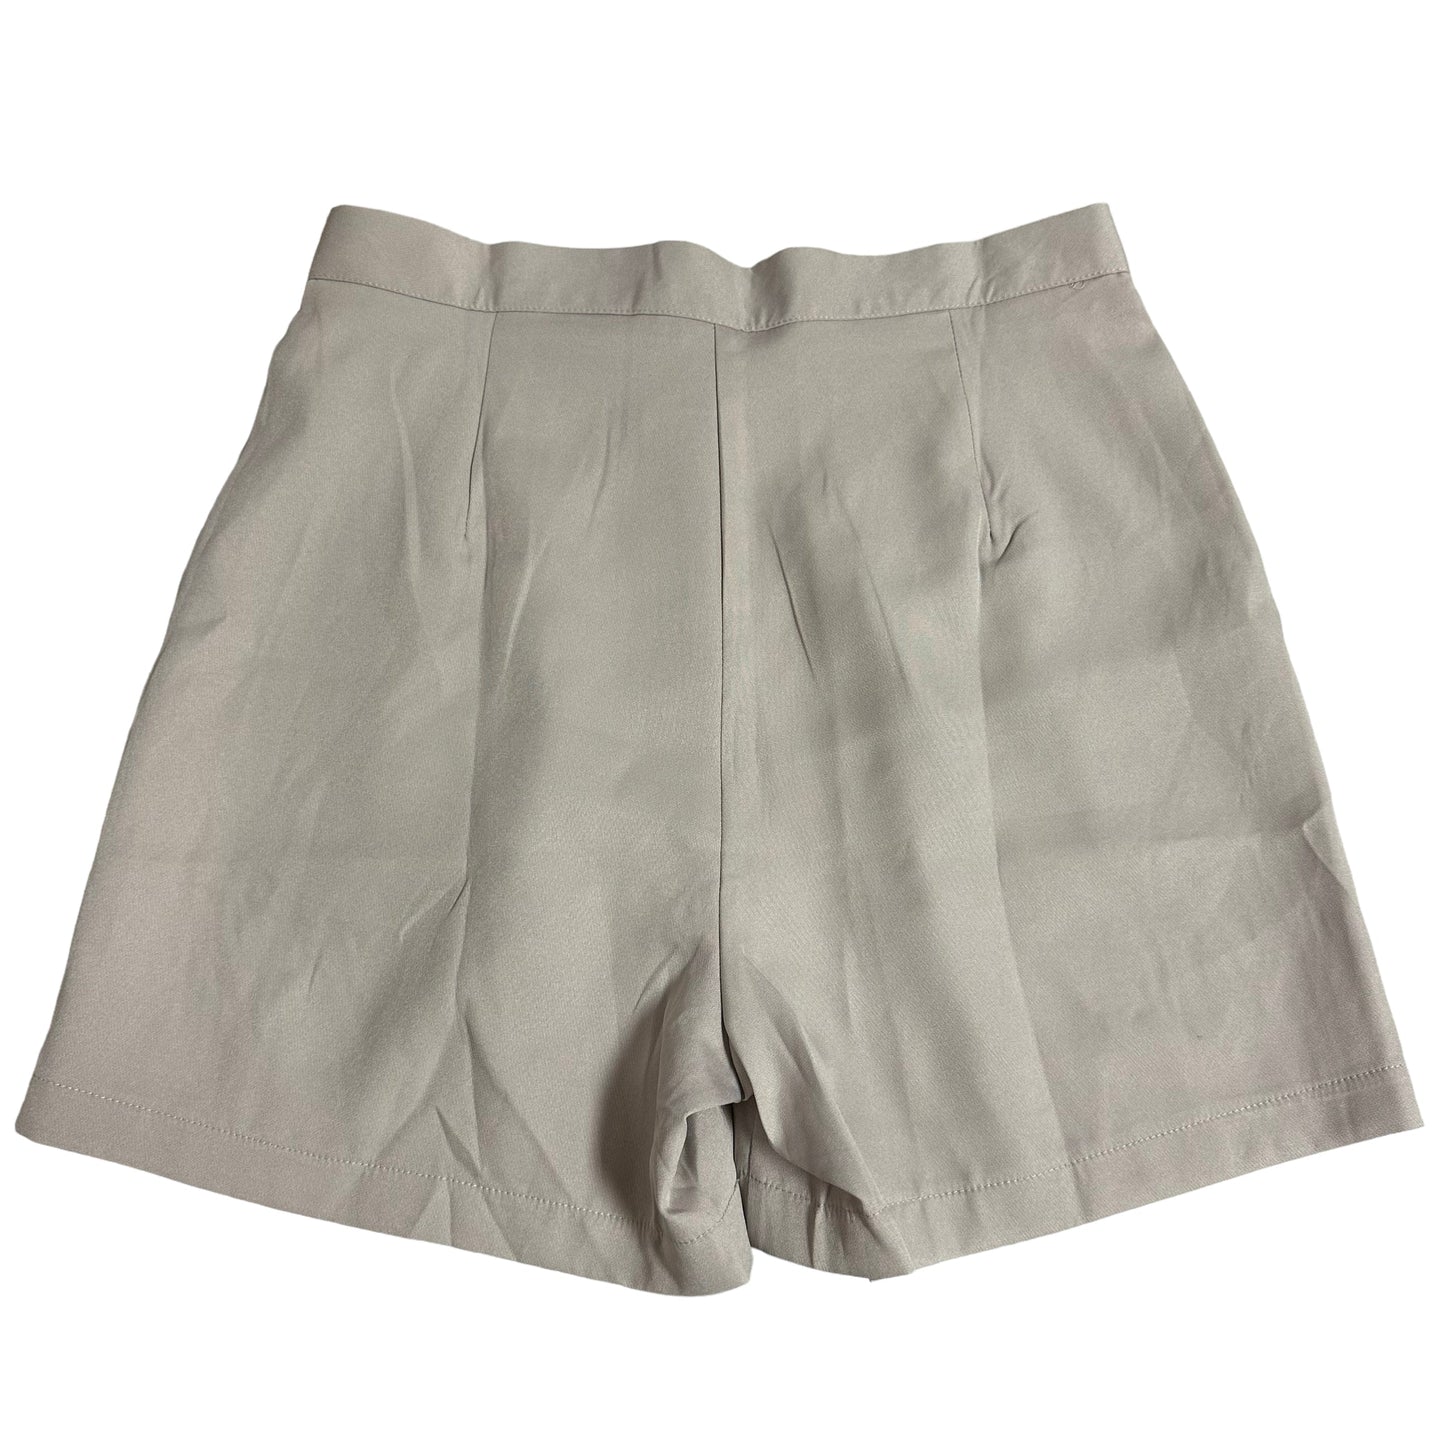 Shorts By Shein  Size: M